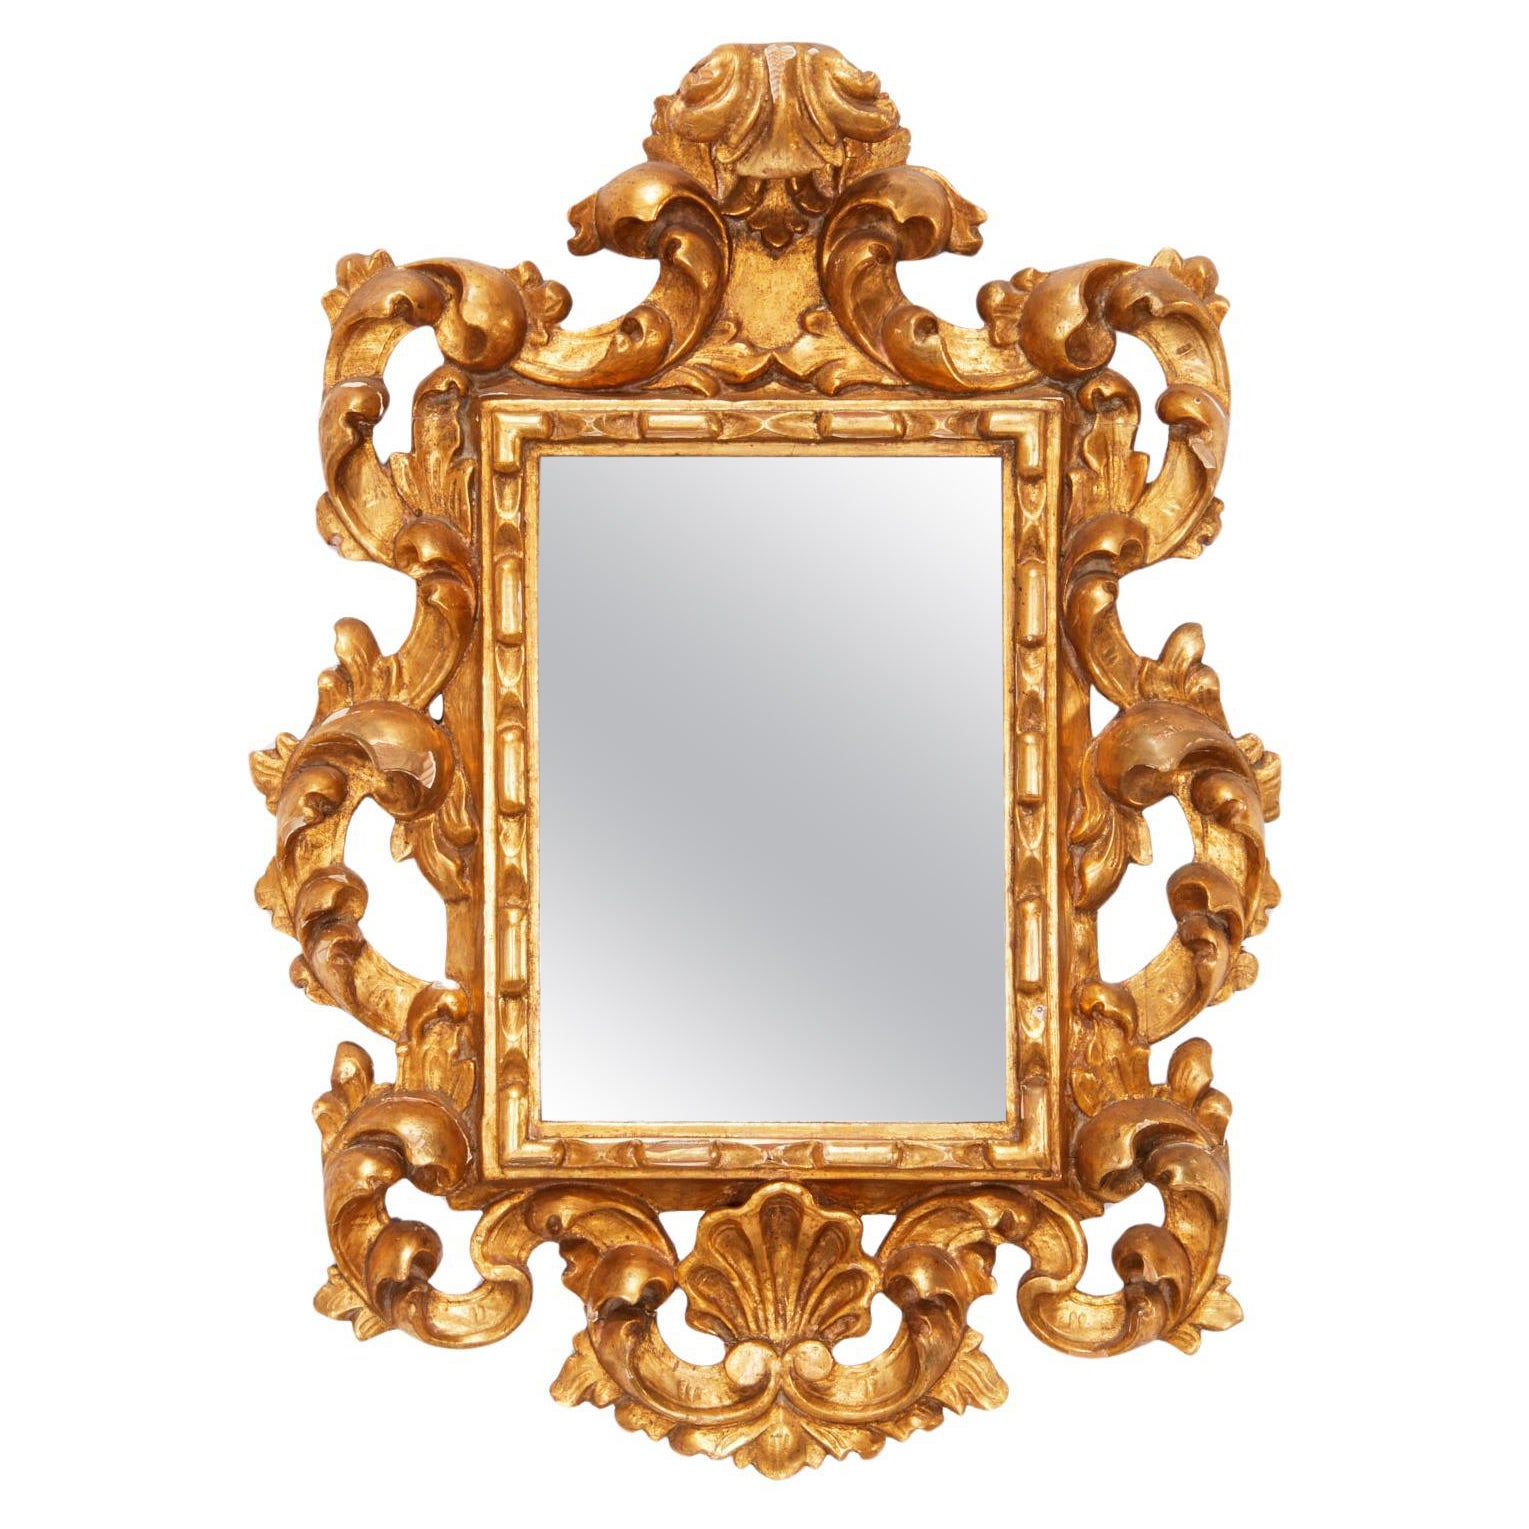 20th c. Spanish Baroque Style Giltwood Mirror With Scrollwork Frame 